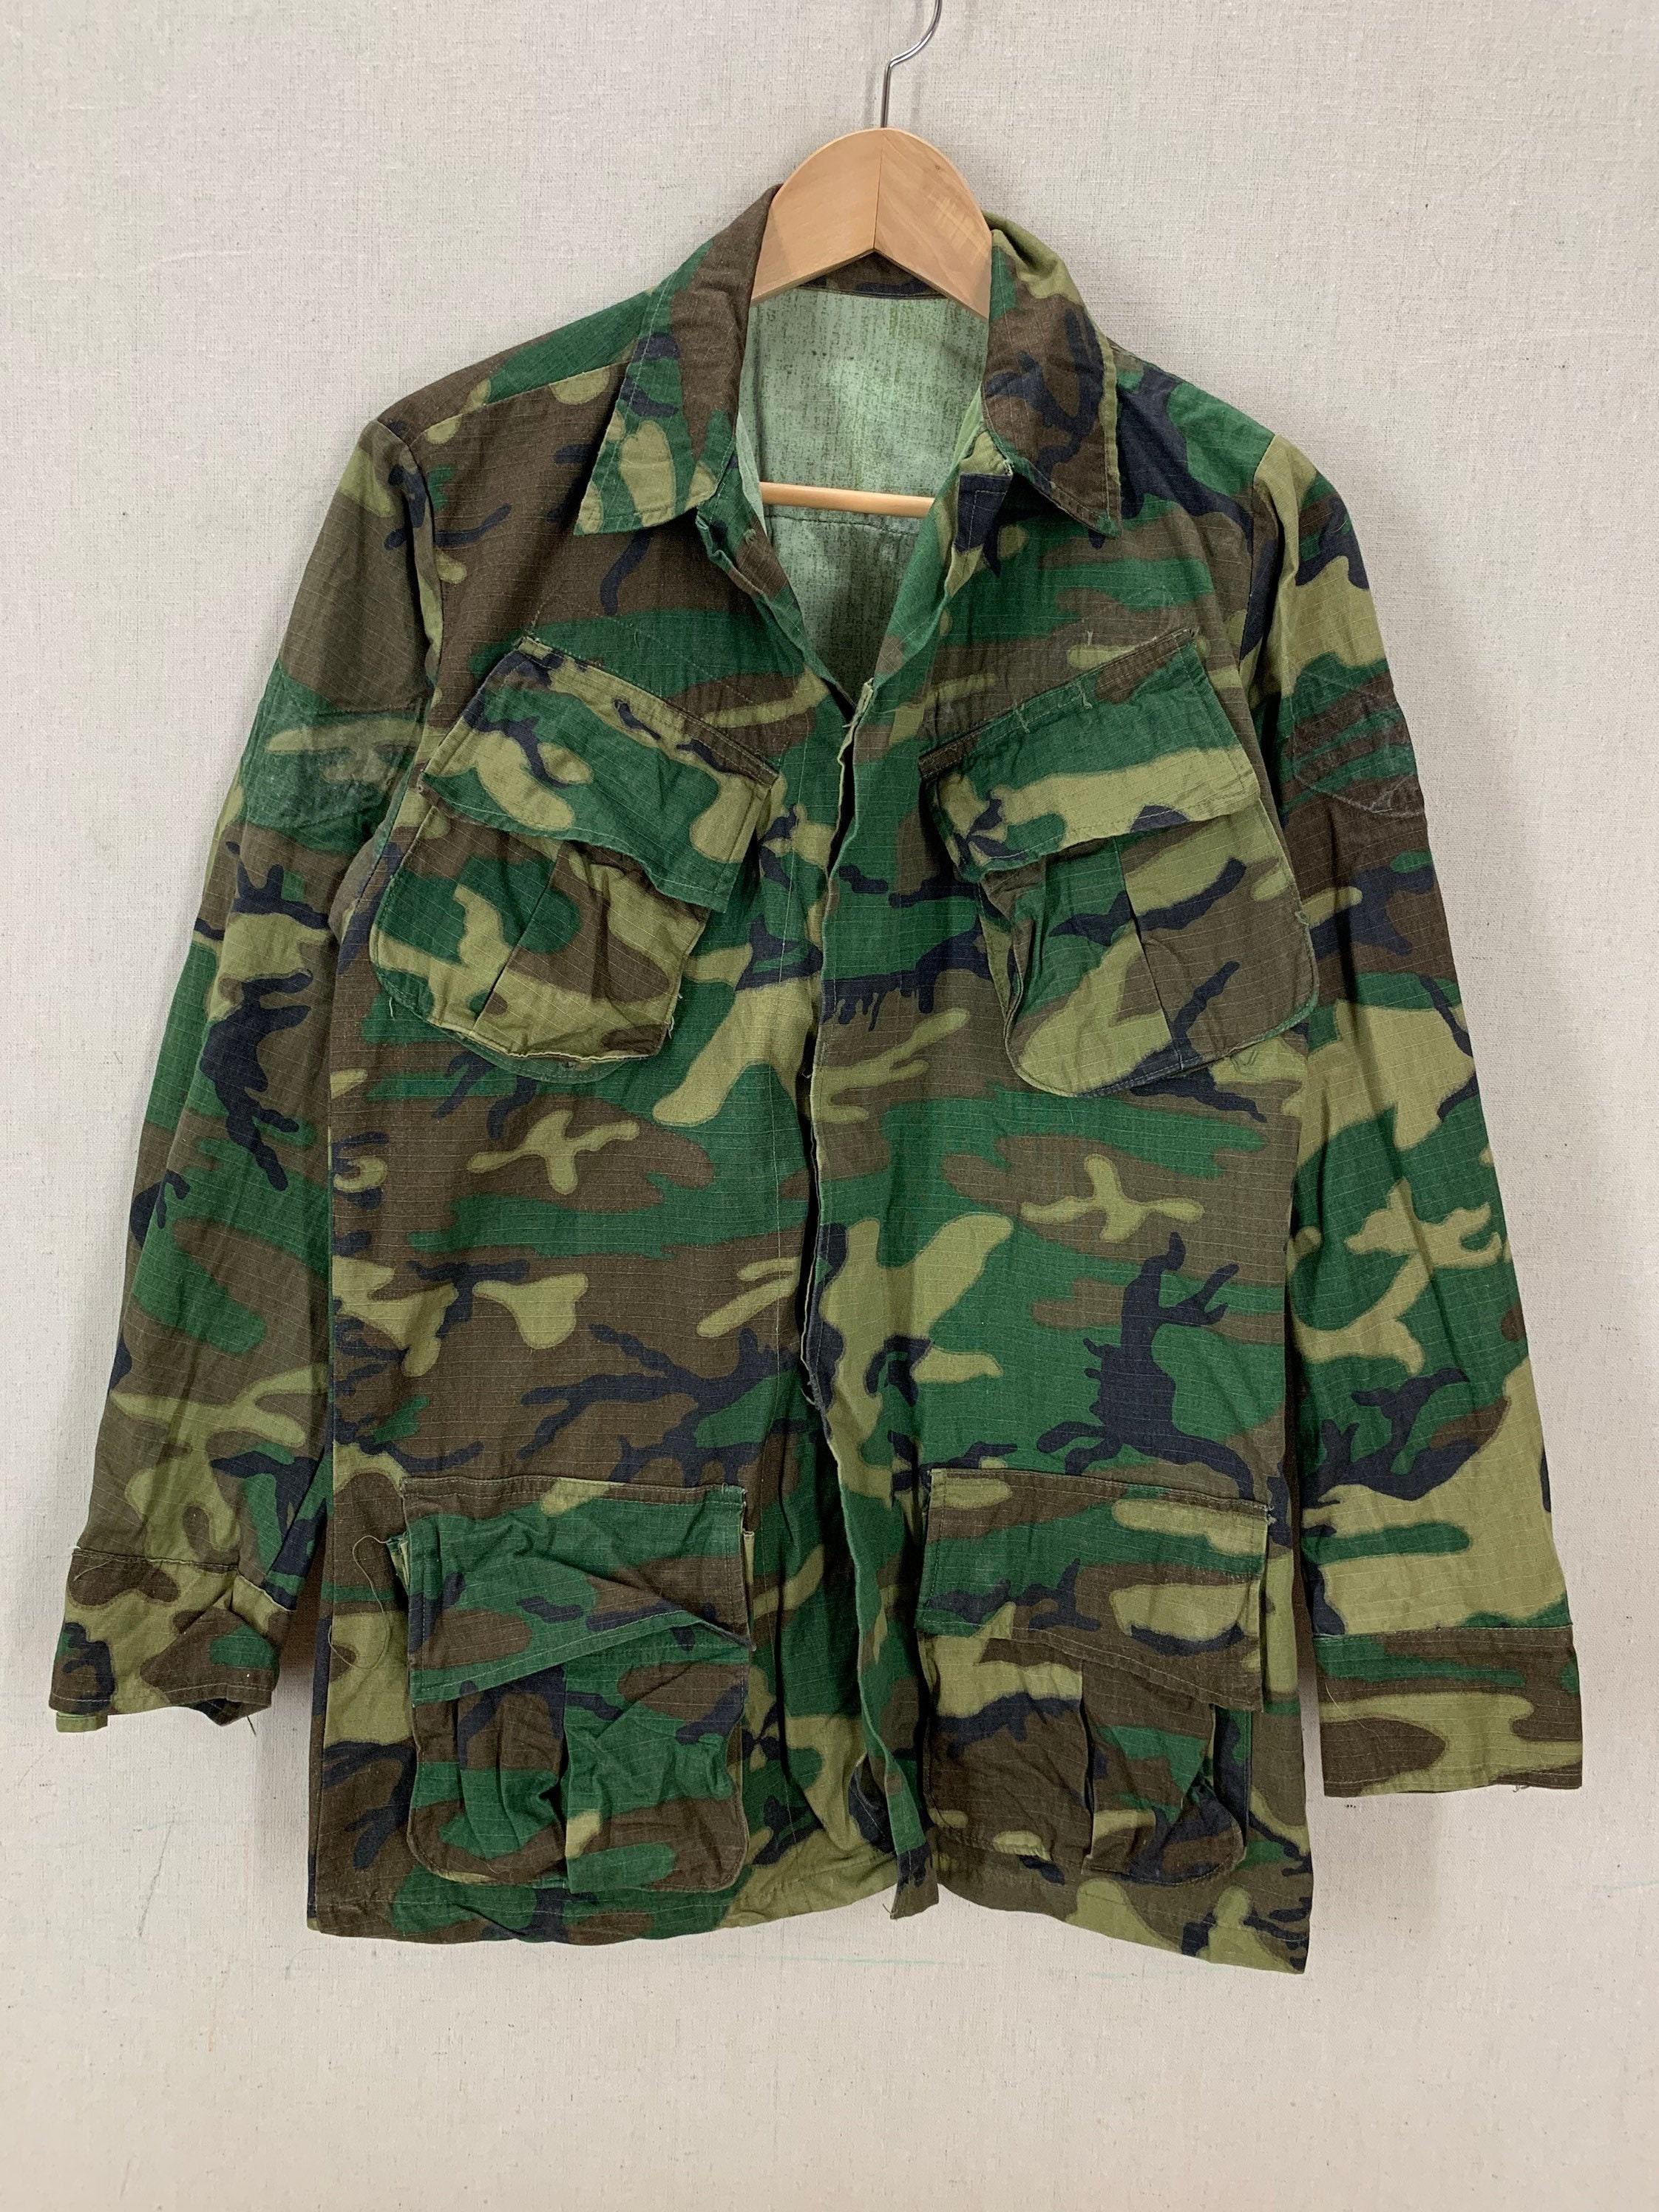 Erdl Camo for sale | Only 2 left at -65%